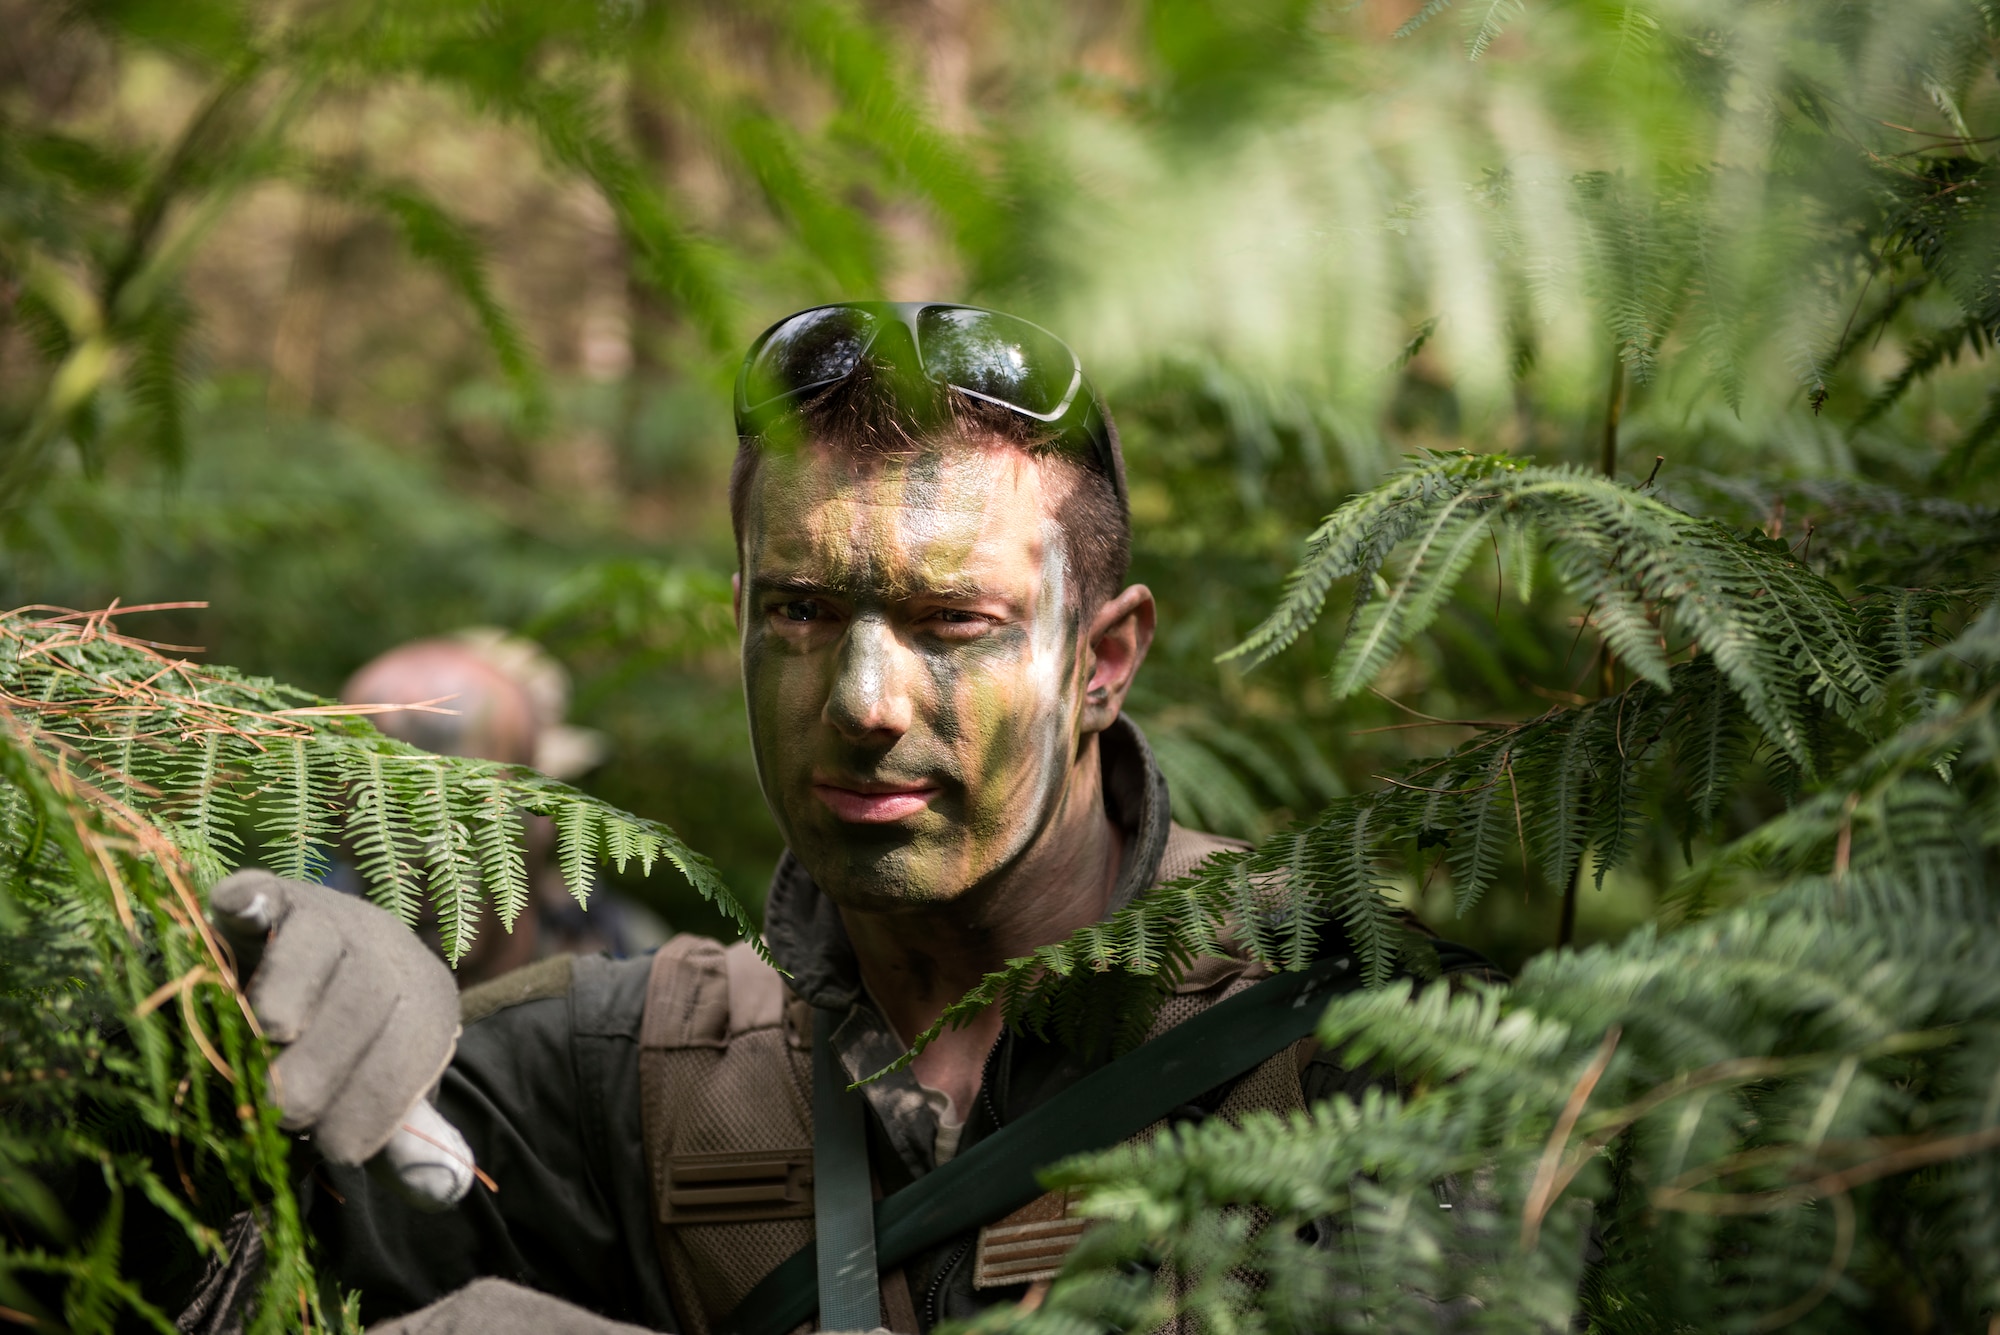 An Airman from the 48th Operations Group carefully maneuvers through vegetation to avoid detection during Combat Survival Training at the Stanford Training Area in Norfolk, England, July 25, 2018. A combined effort of the 48th Fighter Wing, 100th Refueling Wing and 352nd Special Operations Group SERE teams ensure that USAFE aircrews receive the best training possible in the U.K., and provide Airmen with a plethora of resources to draw knowledge from. (U.S. Air Force photo/Senior Airman Malcolm Mayfield)